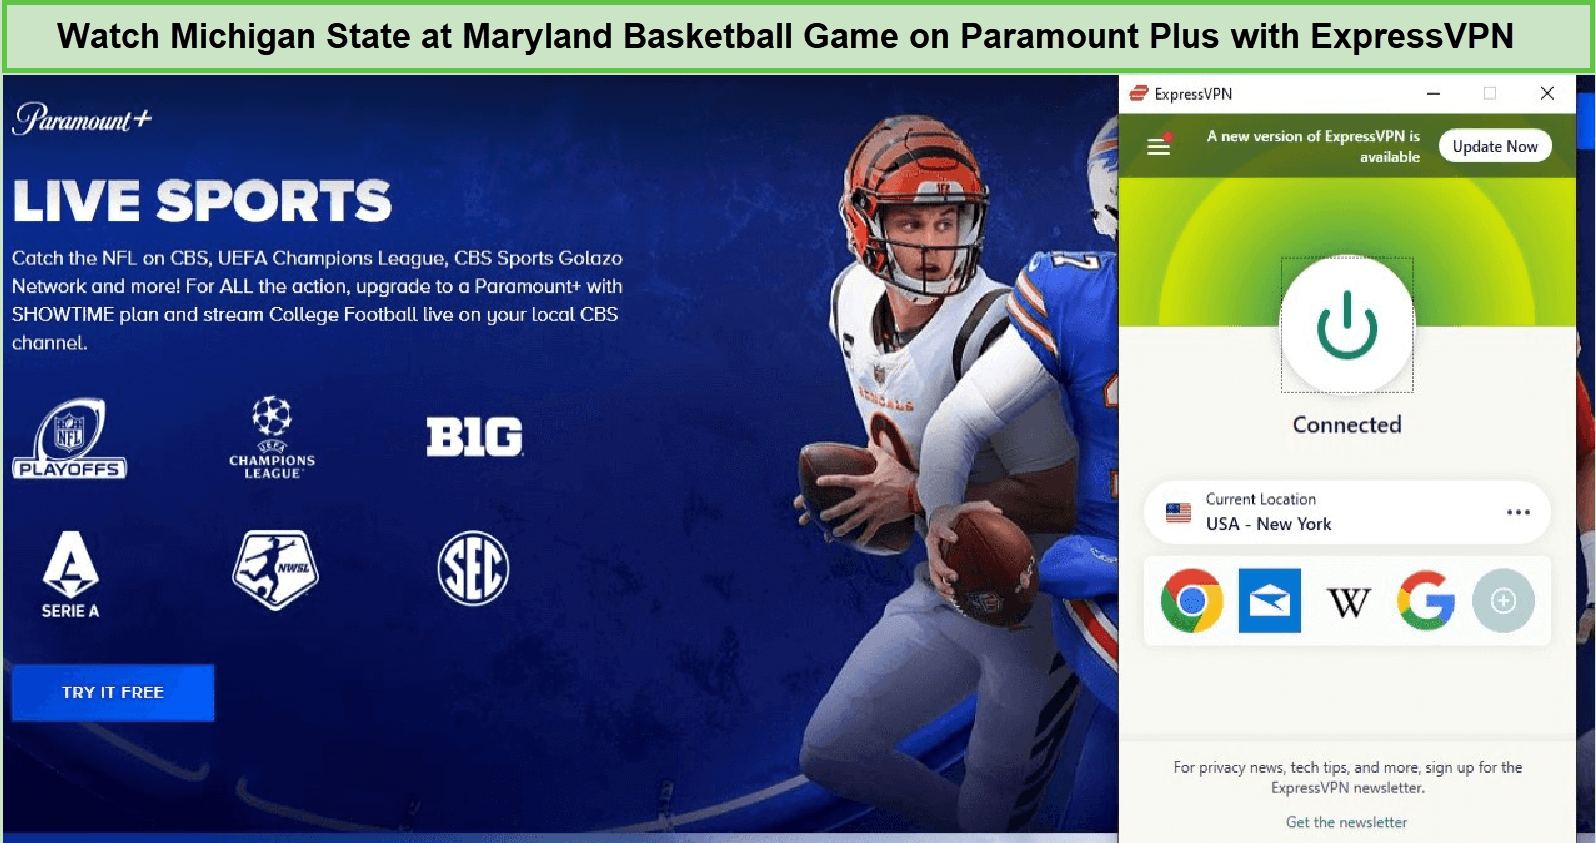 Watch-Michigan-State-at-Maryland-Basketball-Game-in-Germany-on-Paramount-Plus-with-ExpressVPN